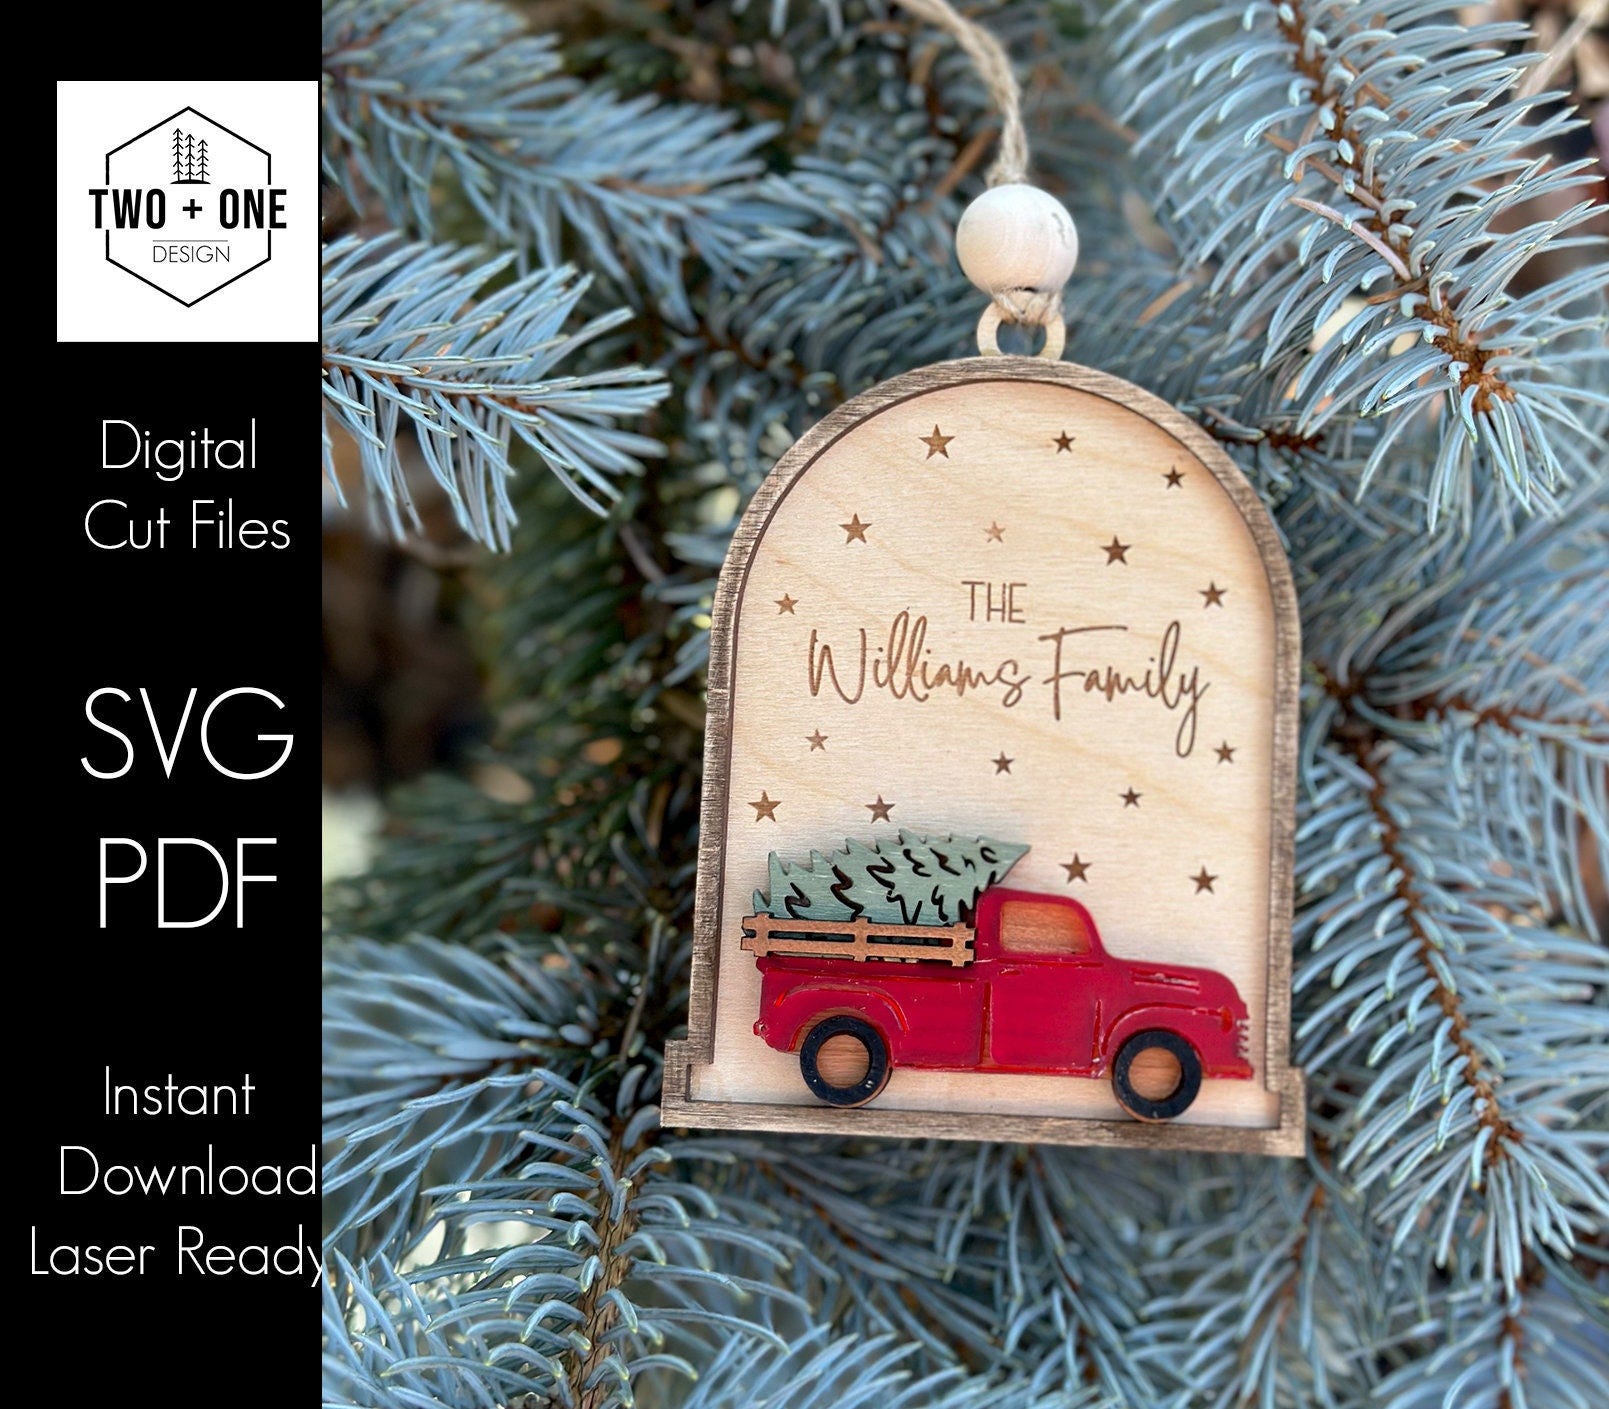 Red Truck Christmas Ornament SVG File